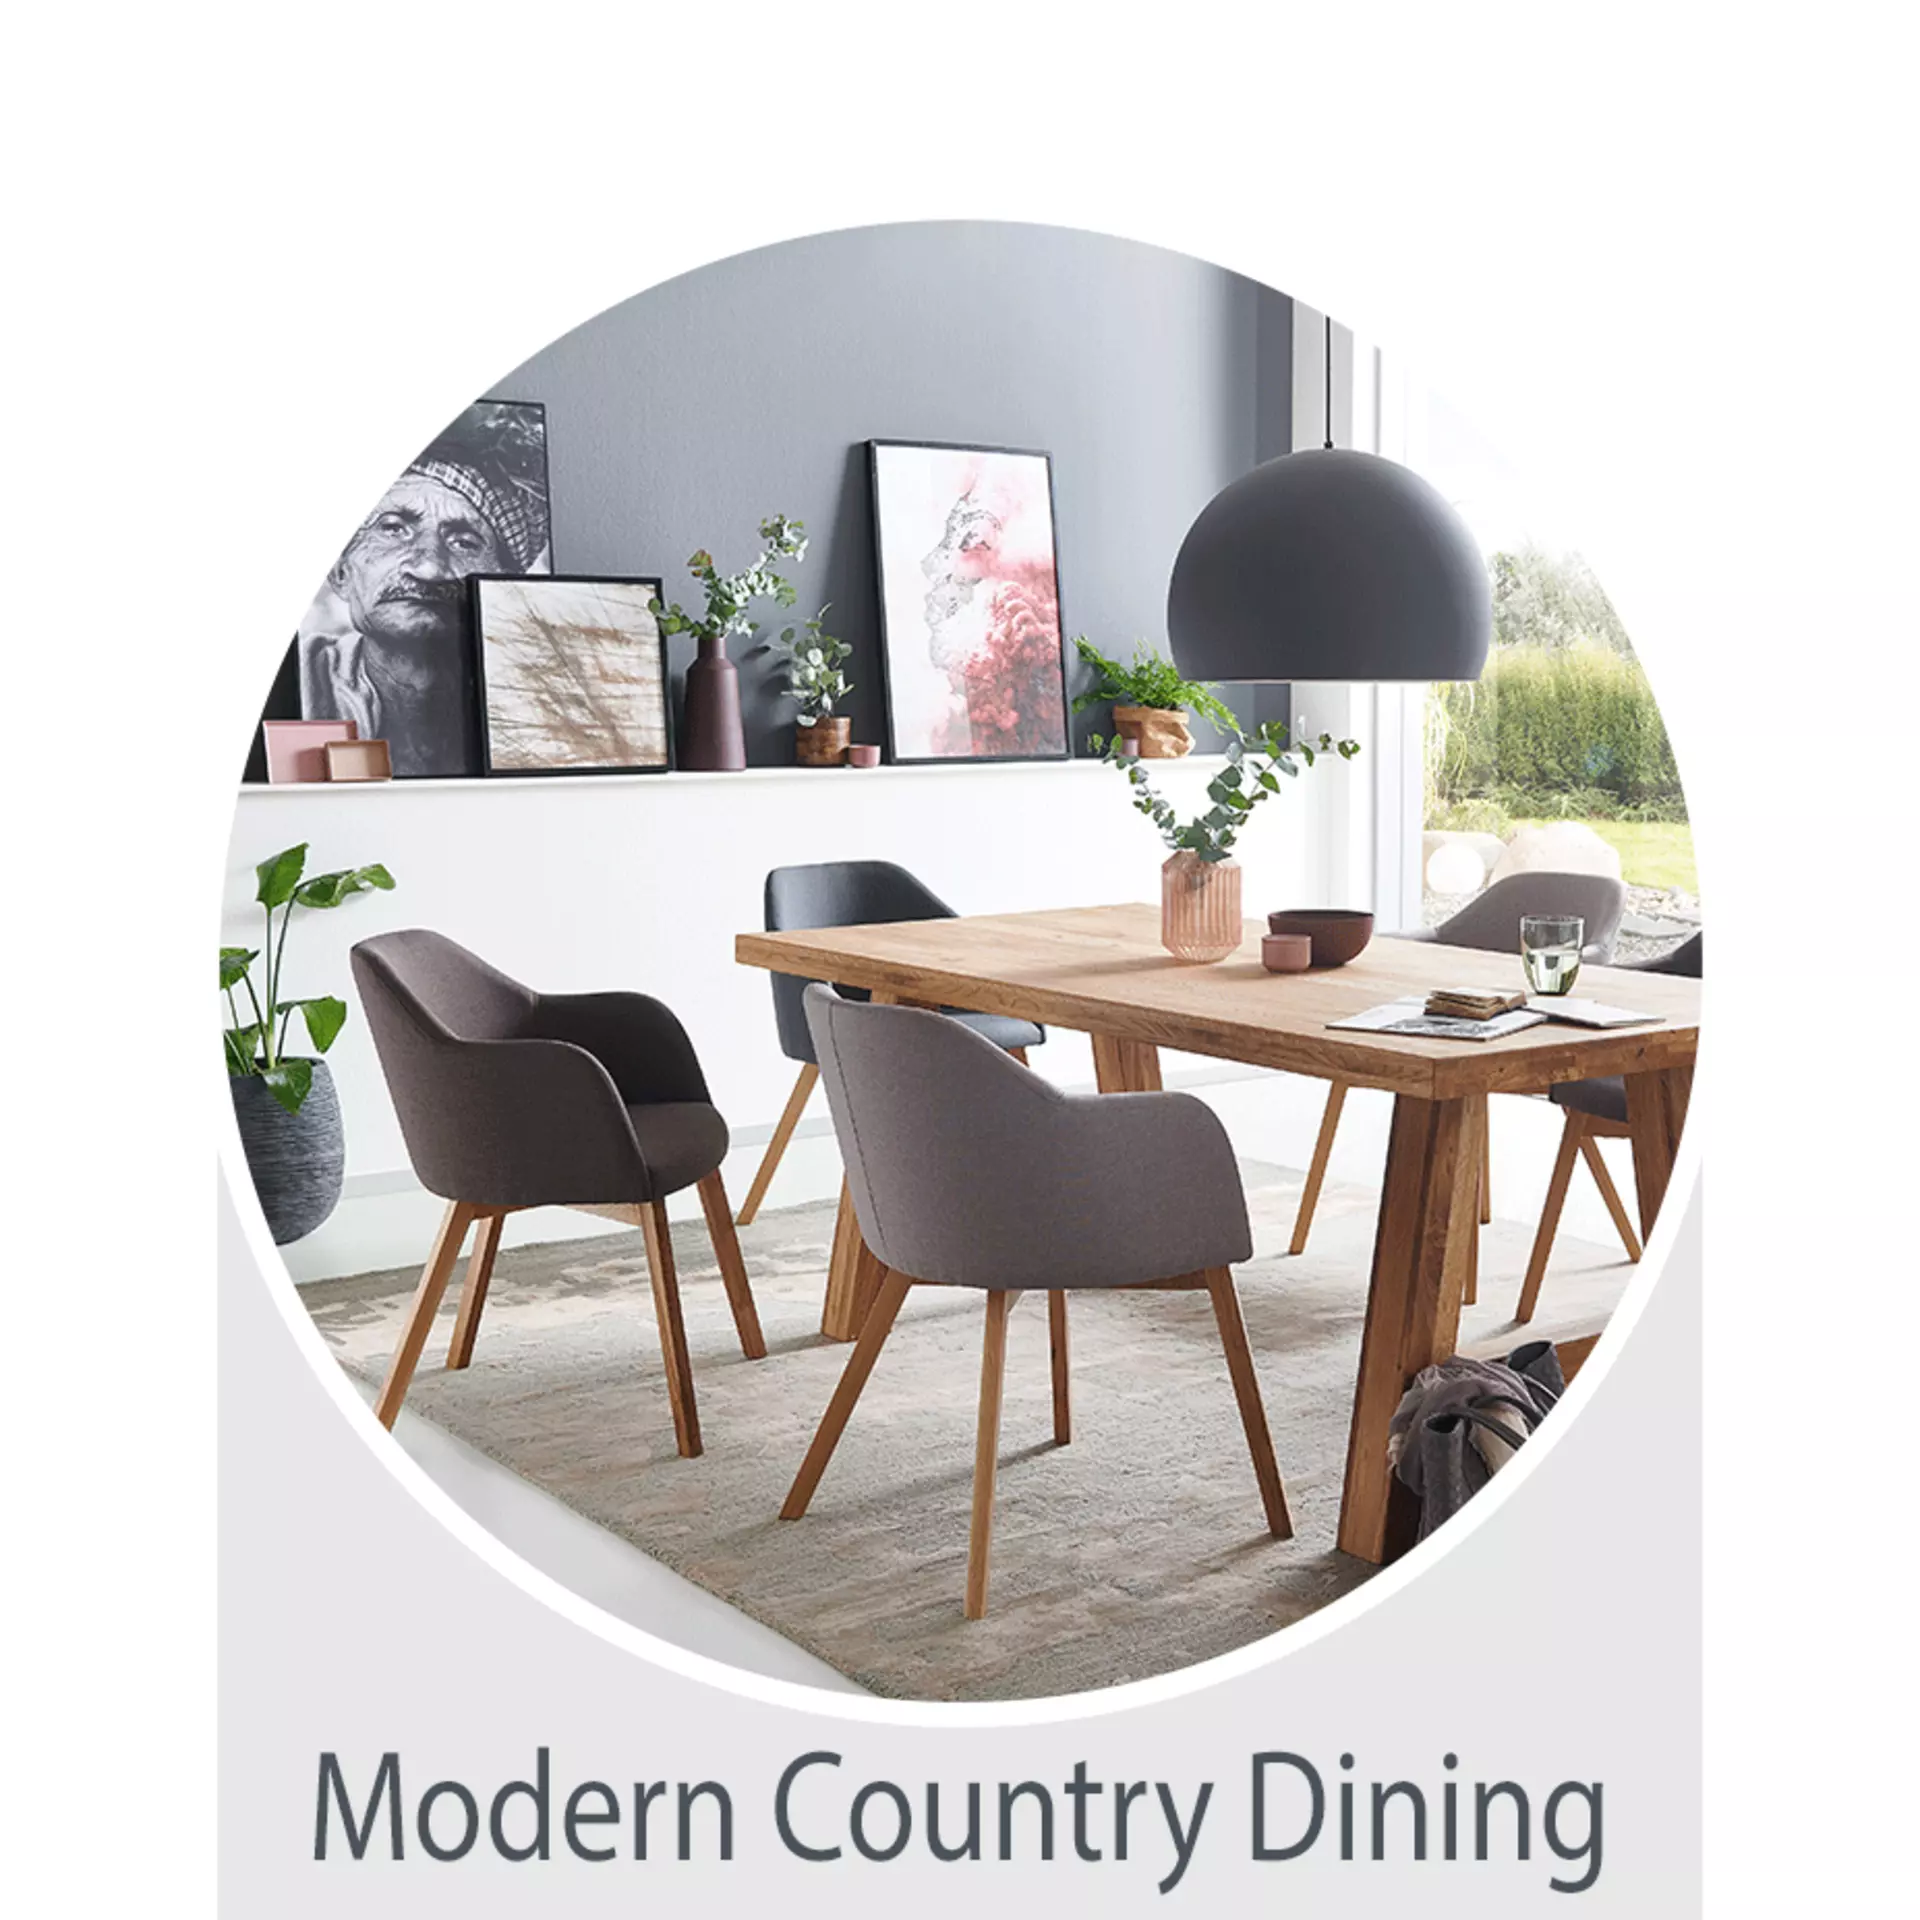 Shop the Look - Modern Country Dining